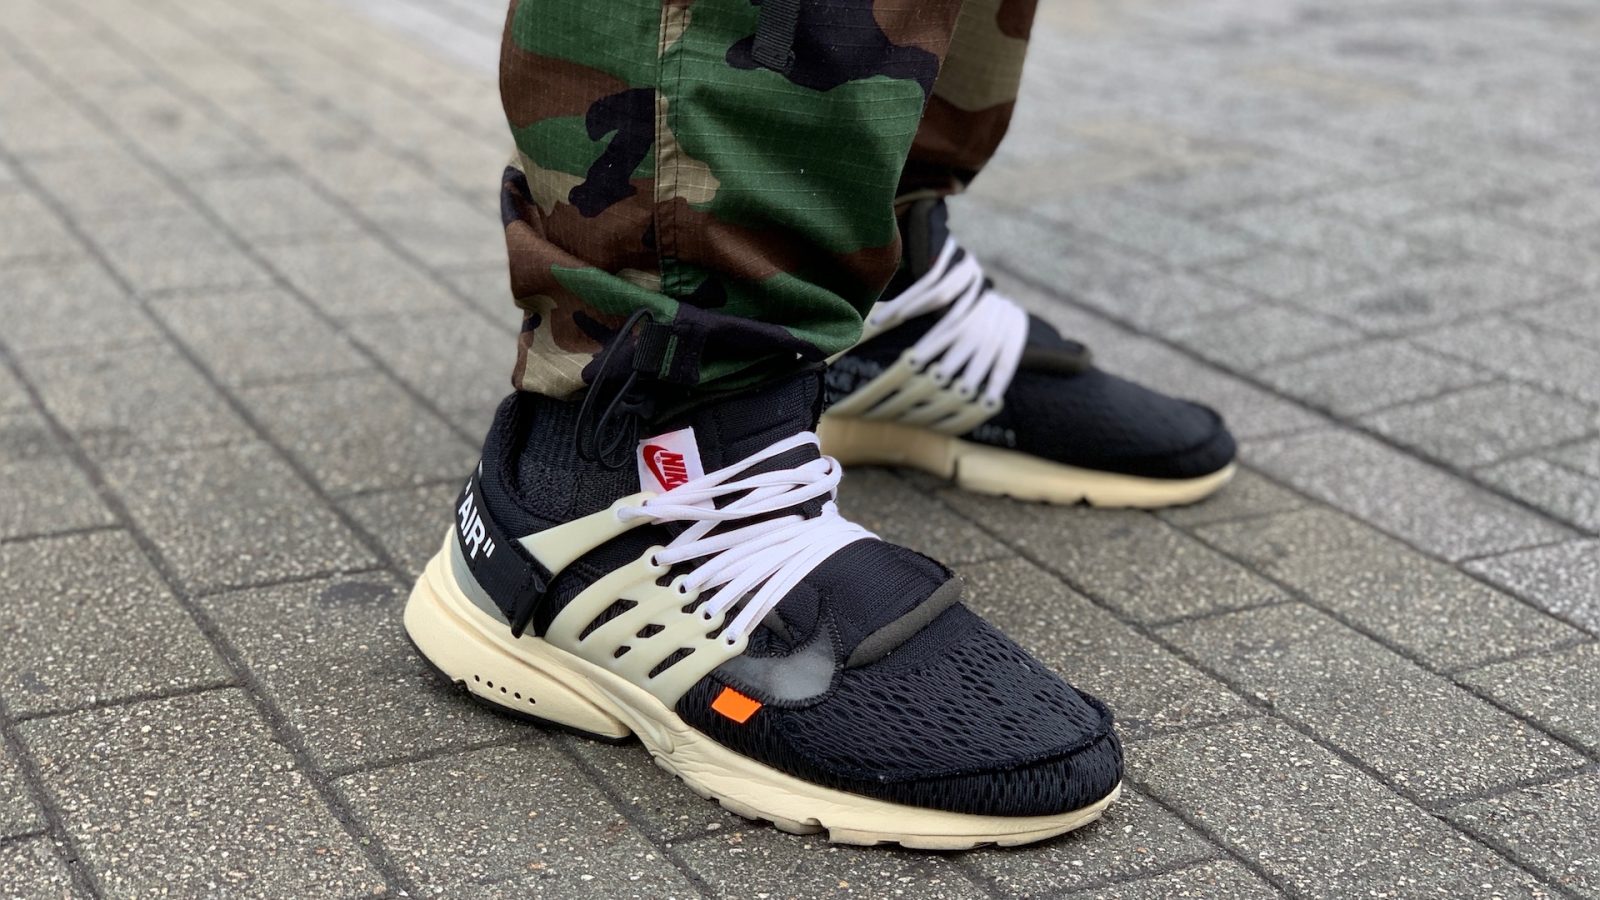 OFF WHITE Presto Review in 2020 (How Did it Hold Up?) - This is Hype!